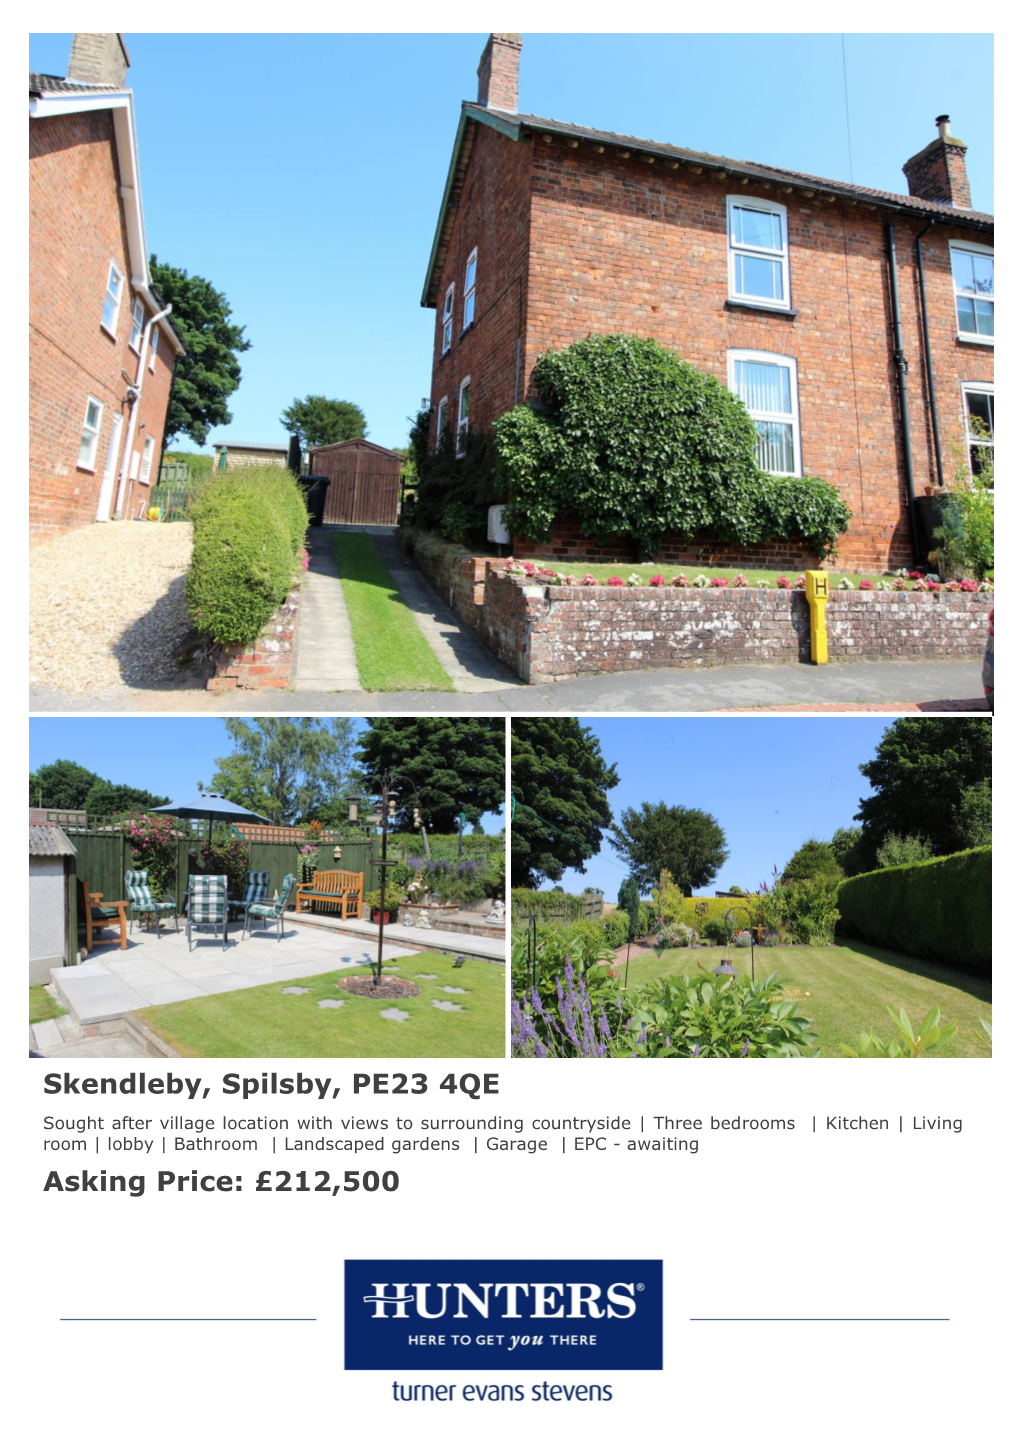 Skendleby, Spilsby, PE23 4QE Asking Price